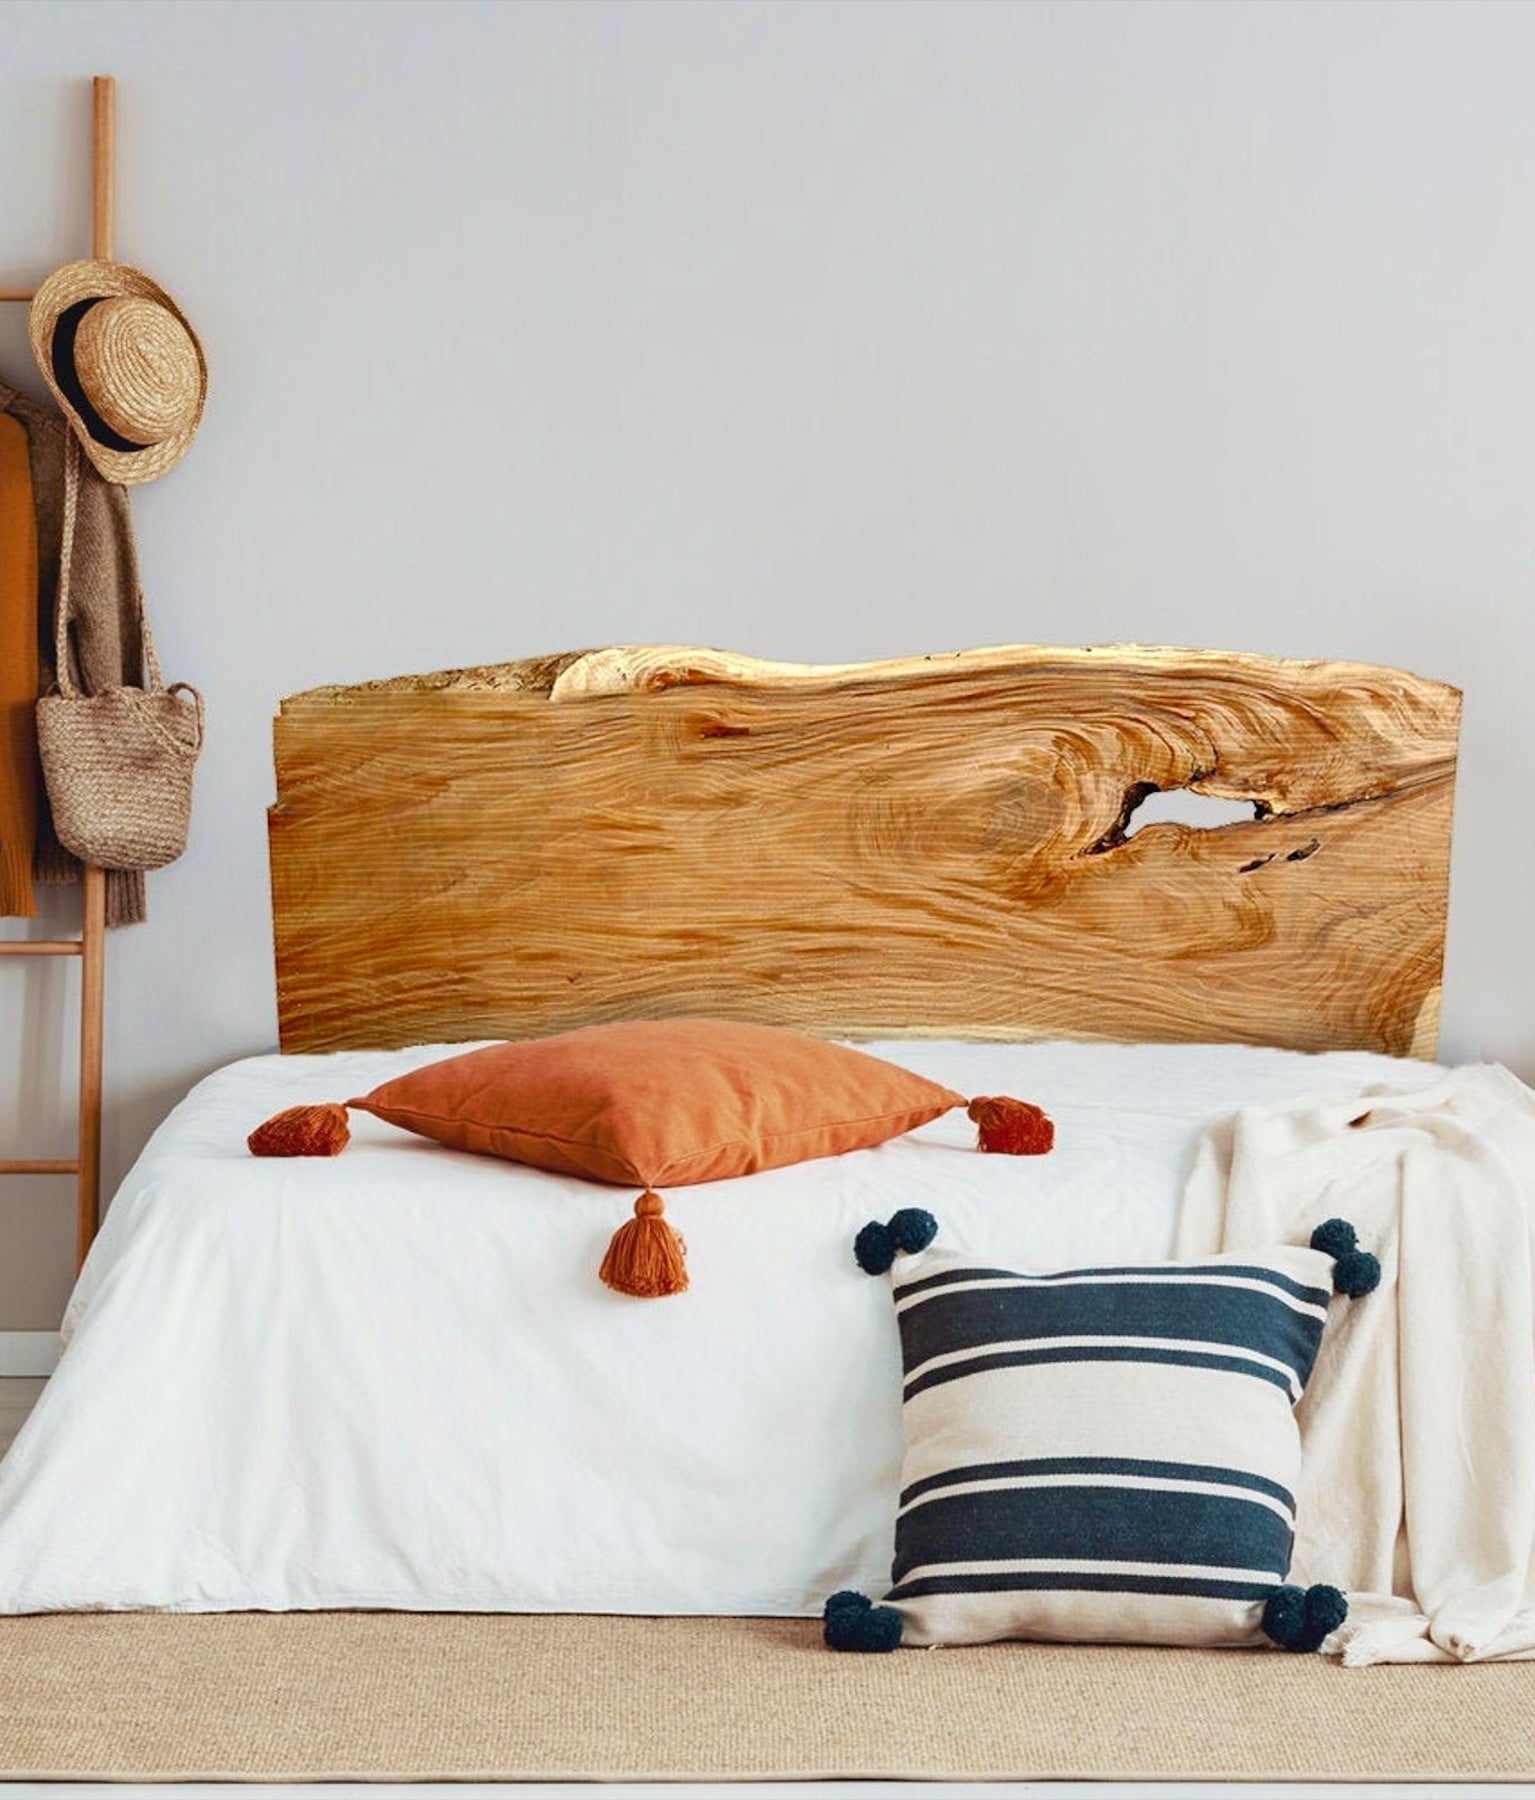 A decal that looks like live wood serves as a headline for a bed with white bedding and a blue-and-white striped and an rust-colored pillow with fringe. There is a hat stand in the background.